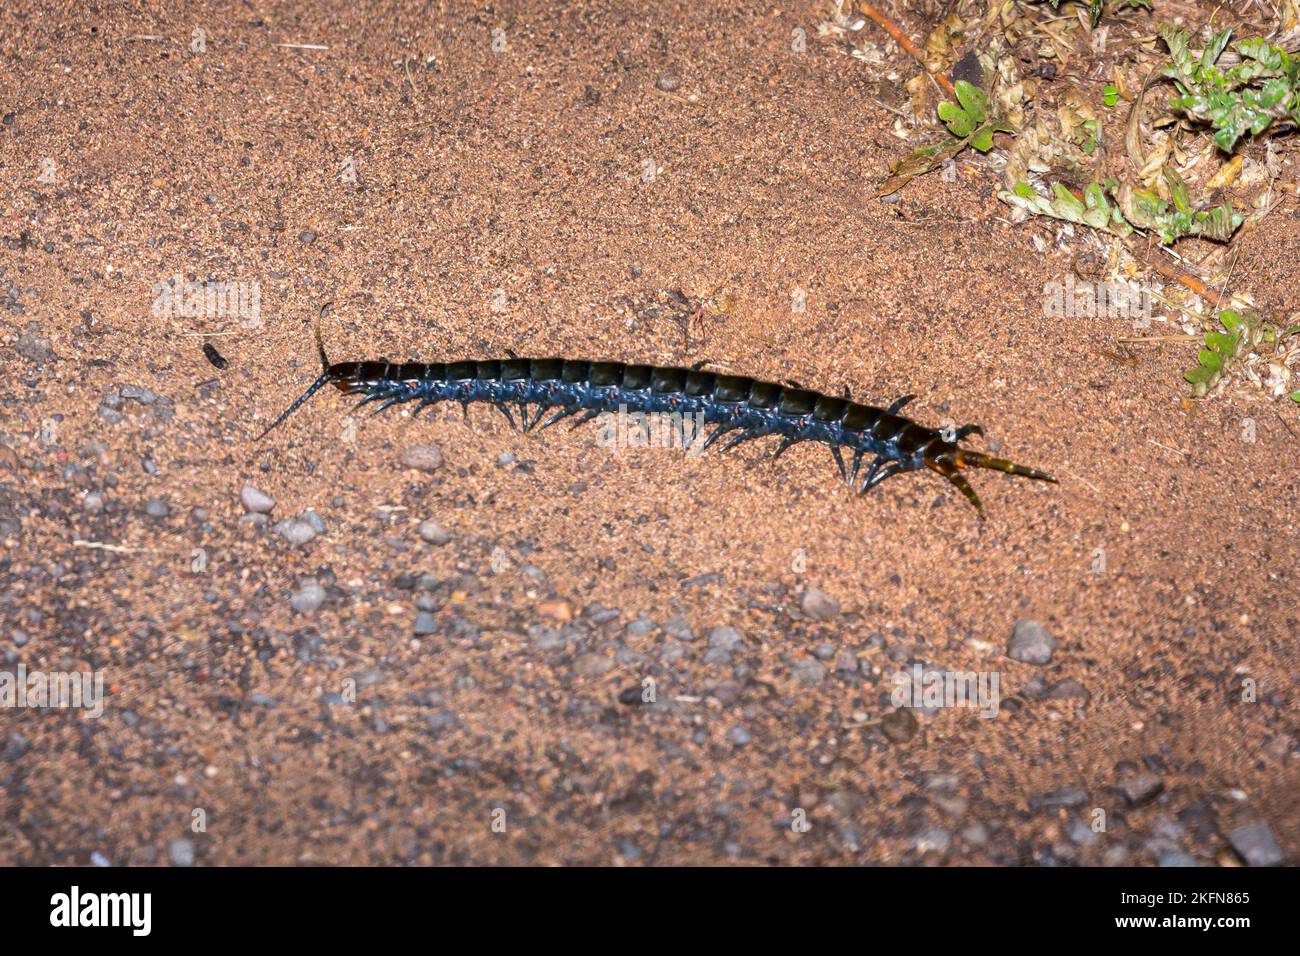 Giant centipede species seen on a night drive in Kruger National Park, South Africa Stock Photo